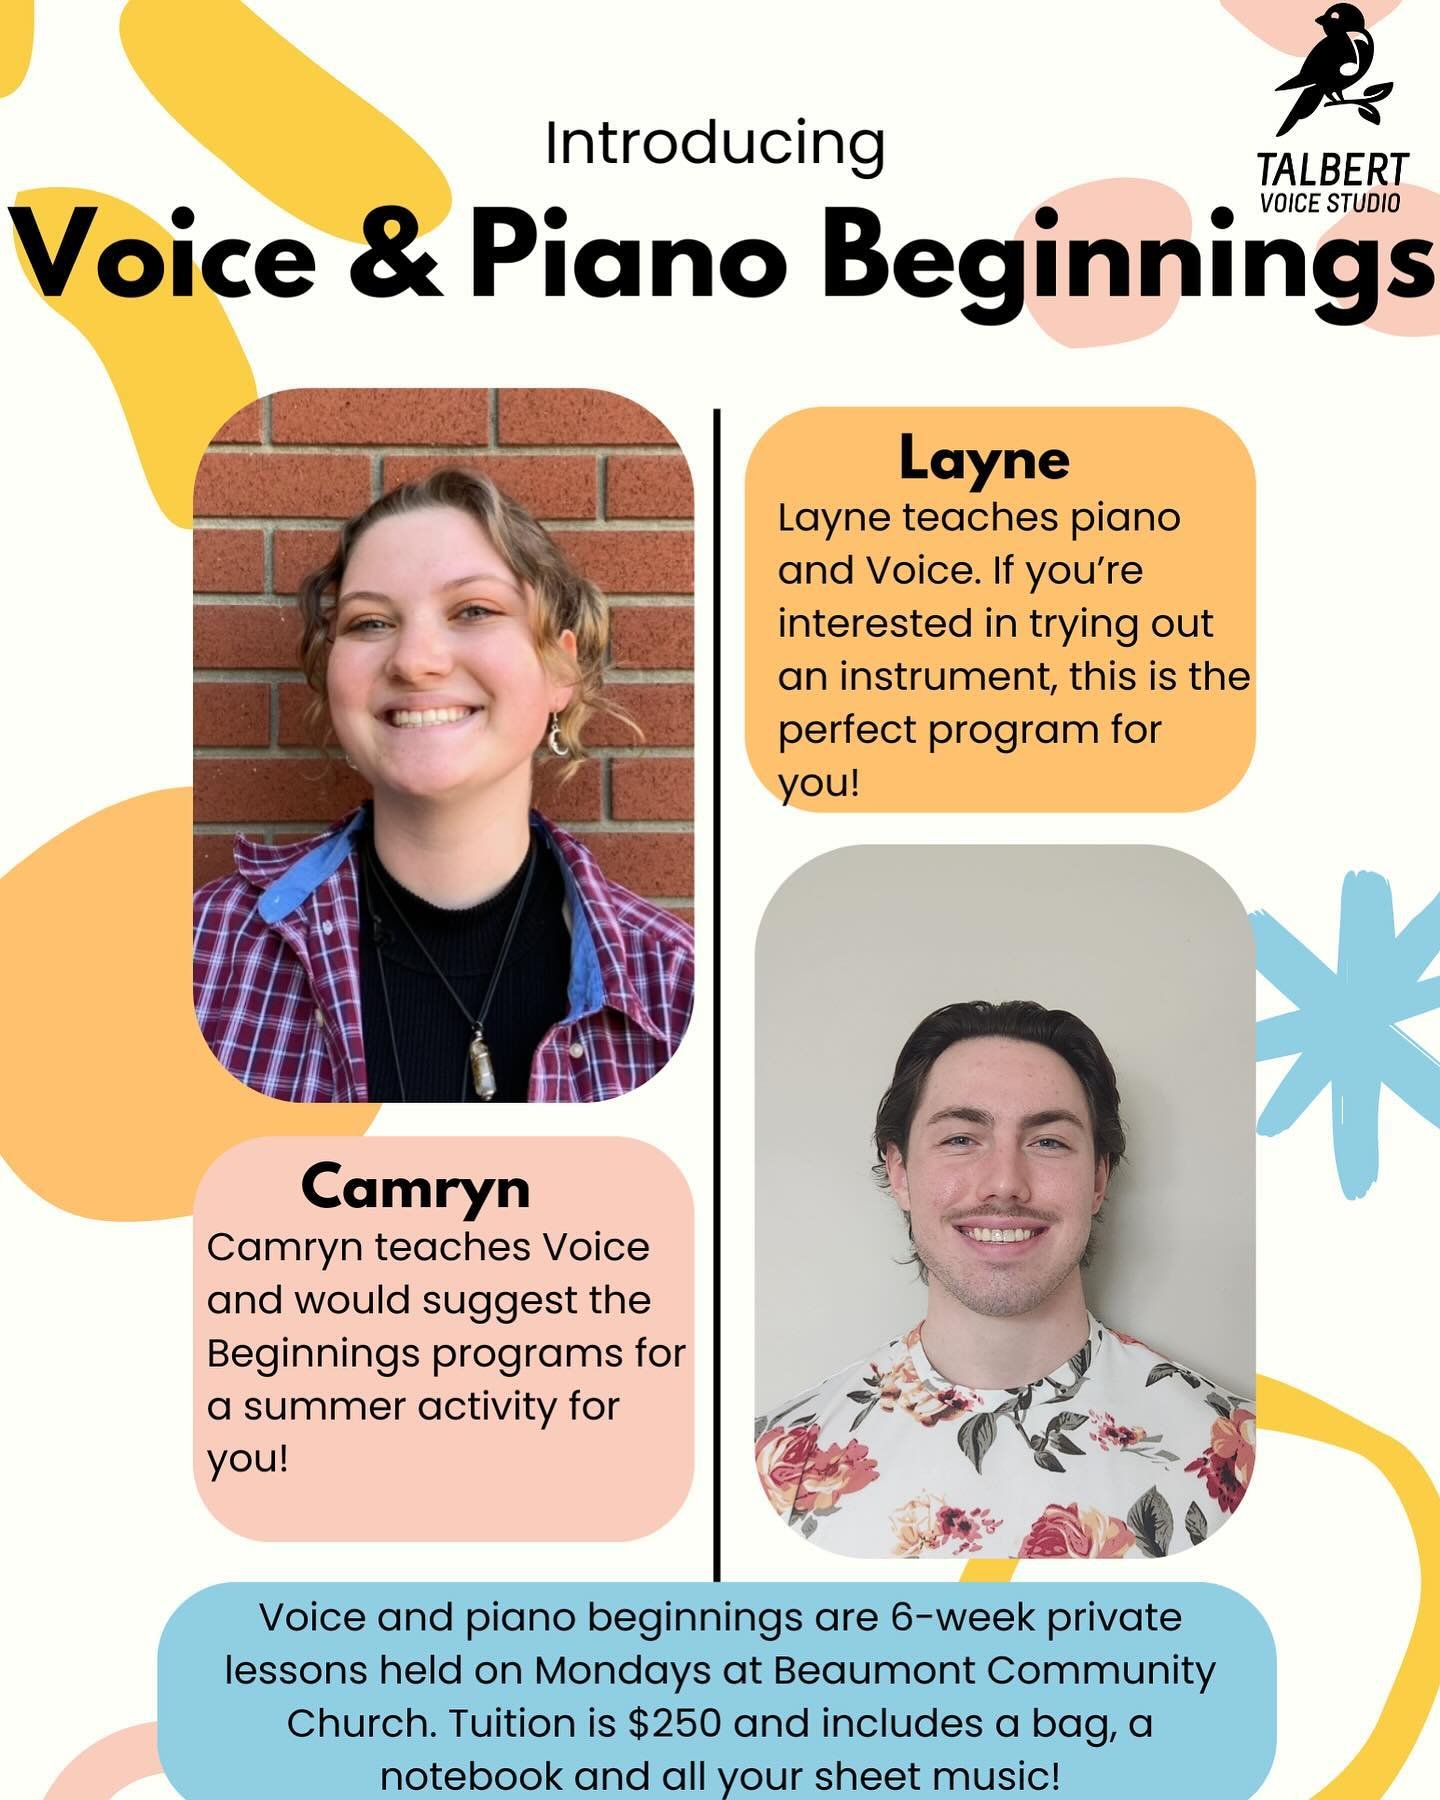 Our assistant assistant conductors are teaching lessons over the summer! 

Do you or your child want to try out voice or piano lessons? Try out our 6-week Voice and/or Piano Beginning classes!

We are offering a session over this summer that is flexi